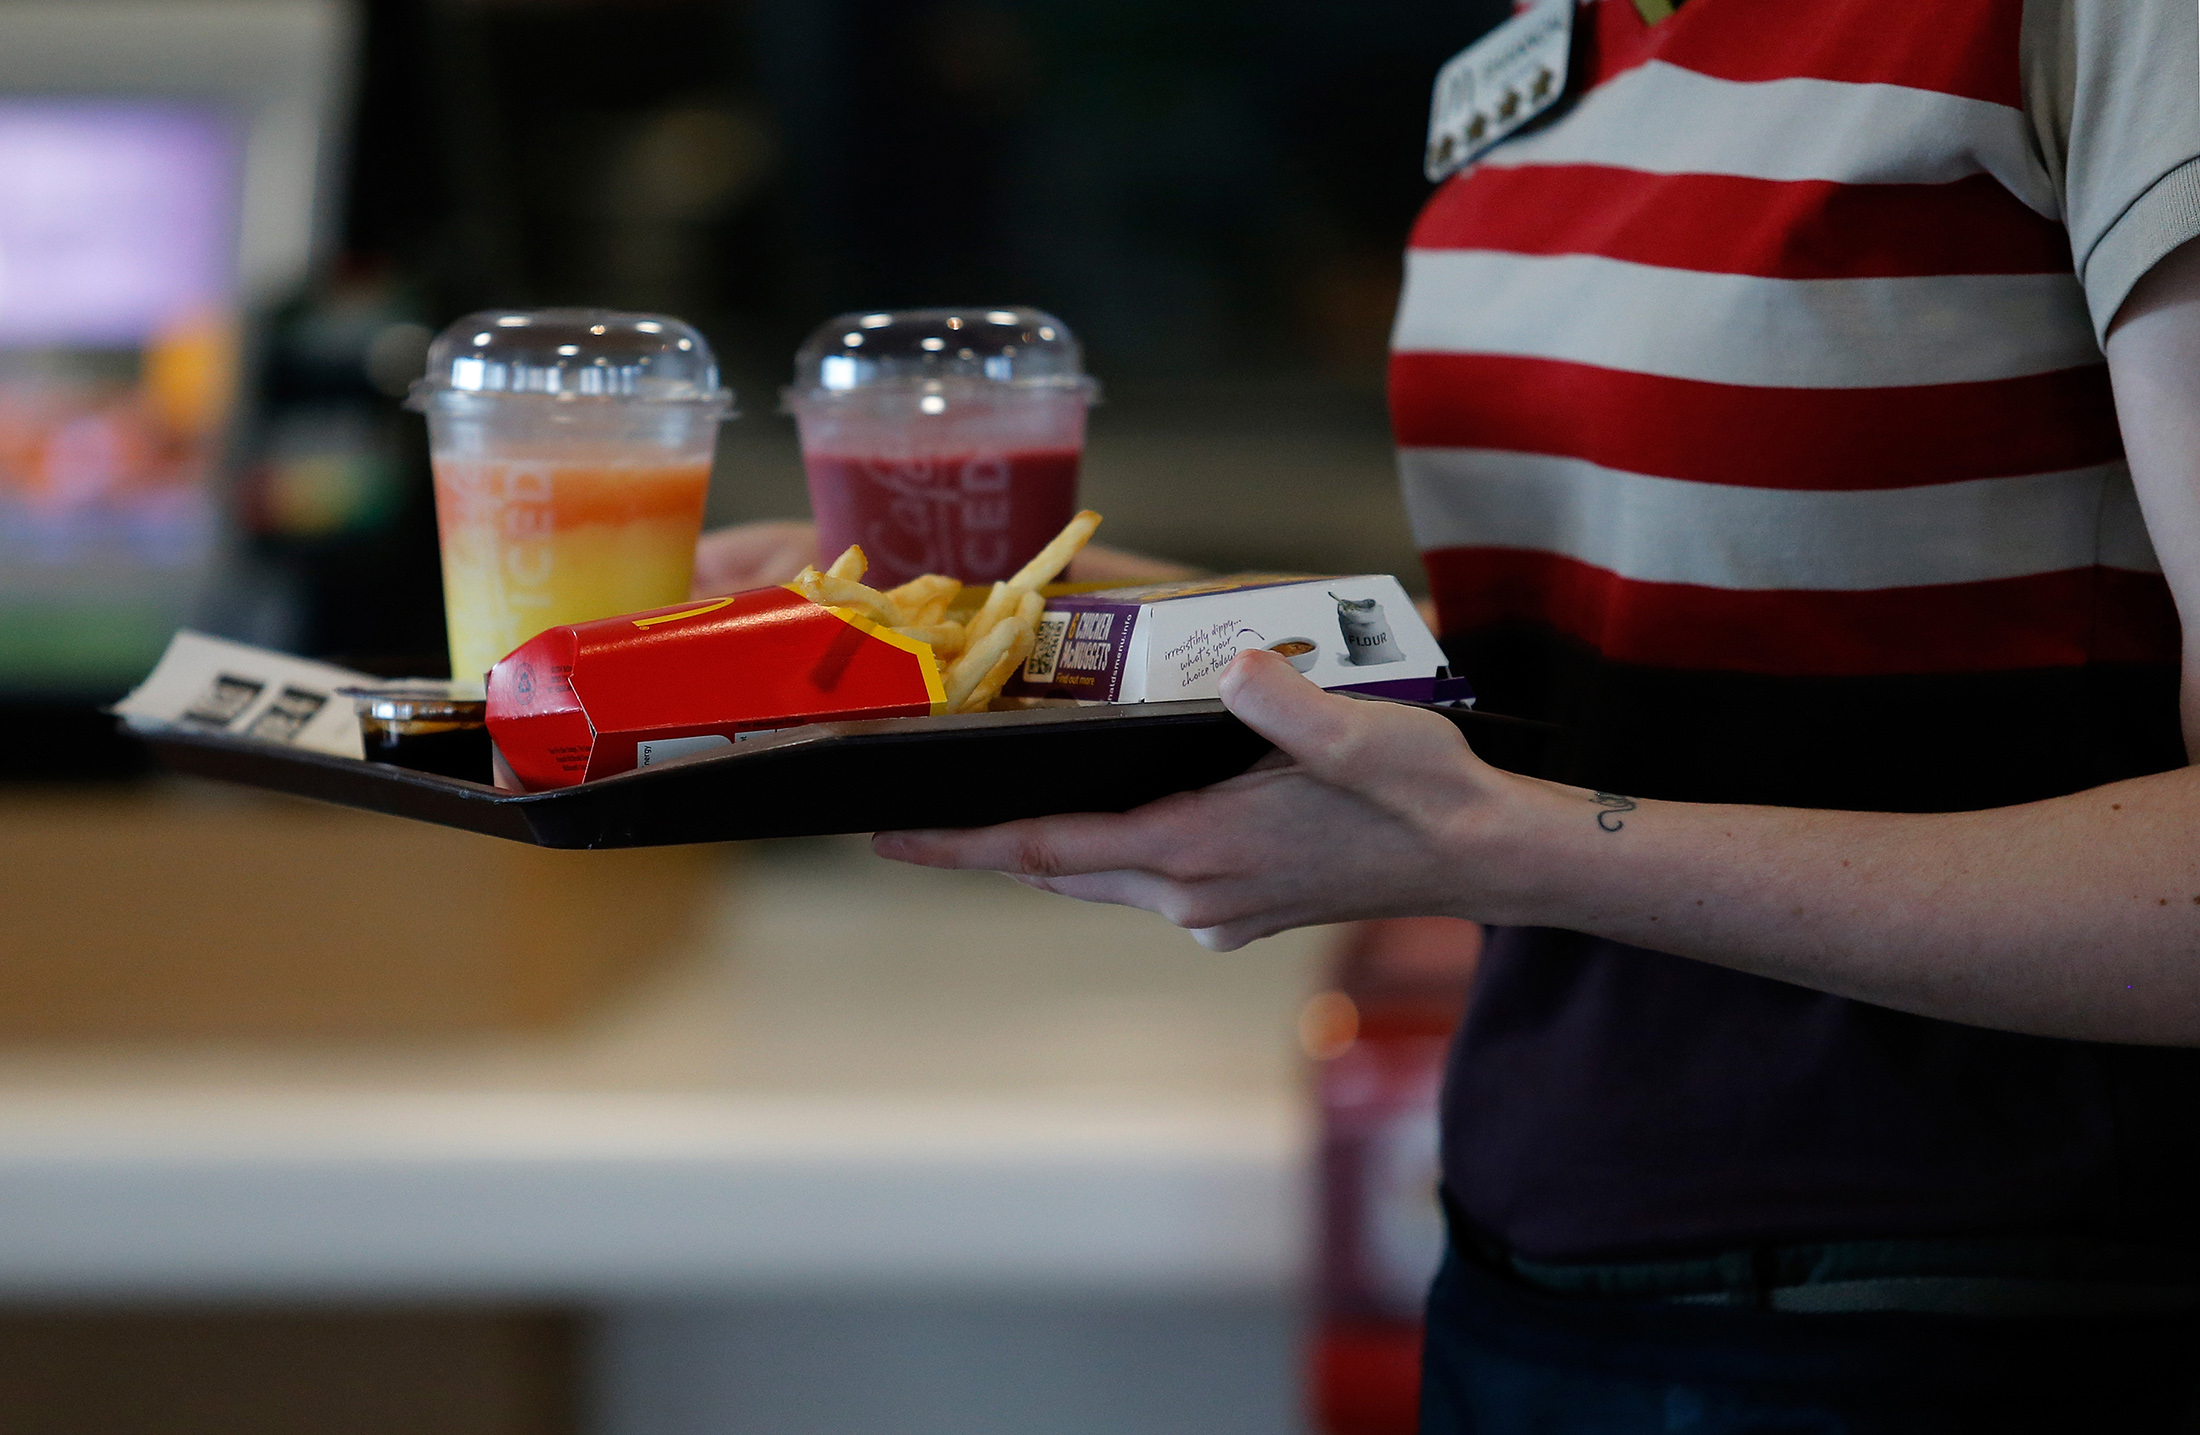 An employee delivers a tray of food and beverages to a customer's table inside a McDonald's Corp. restaurant in Manchester, U.K.
